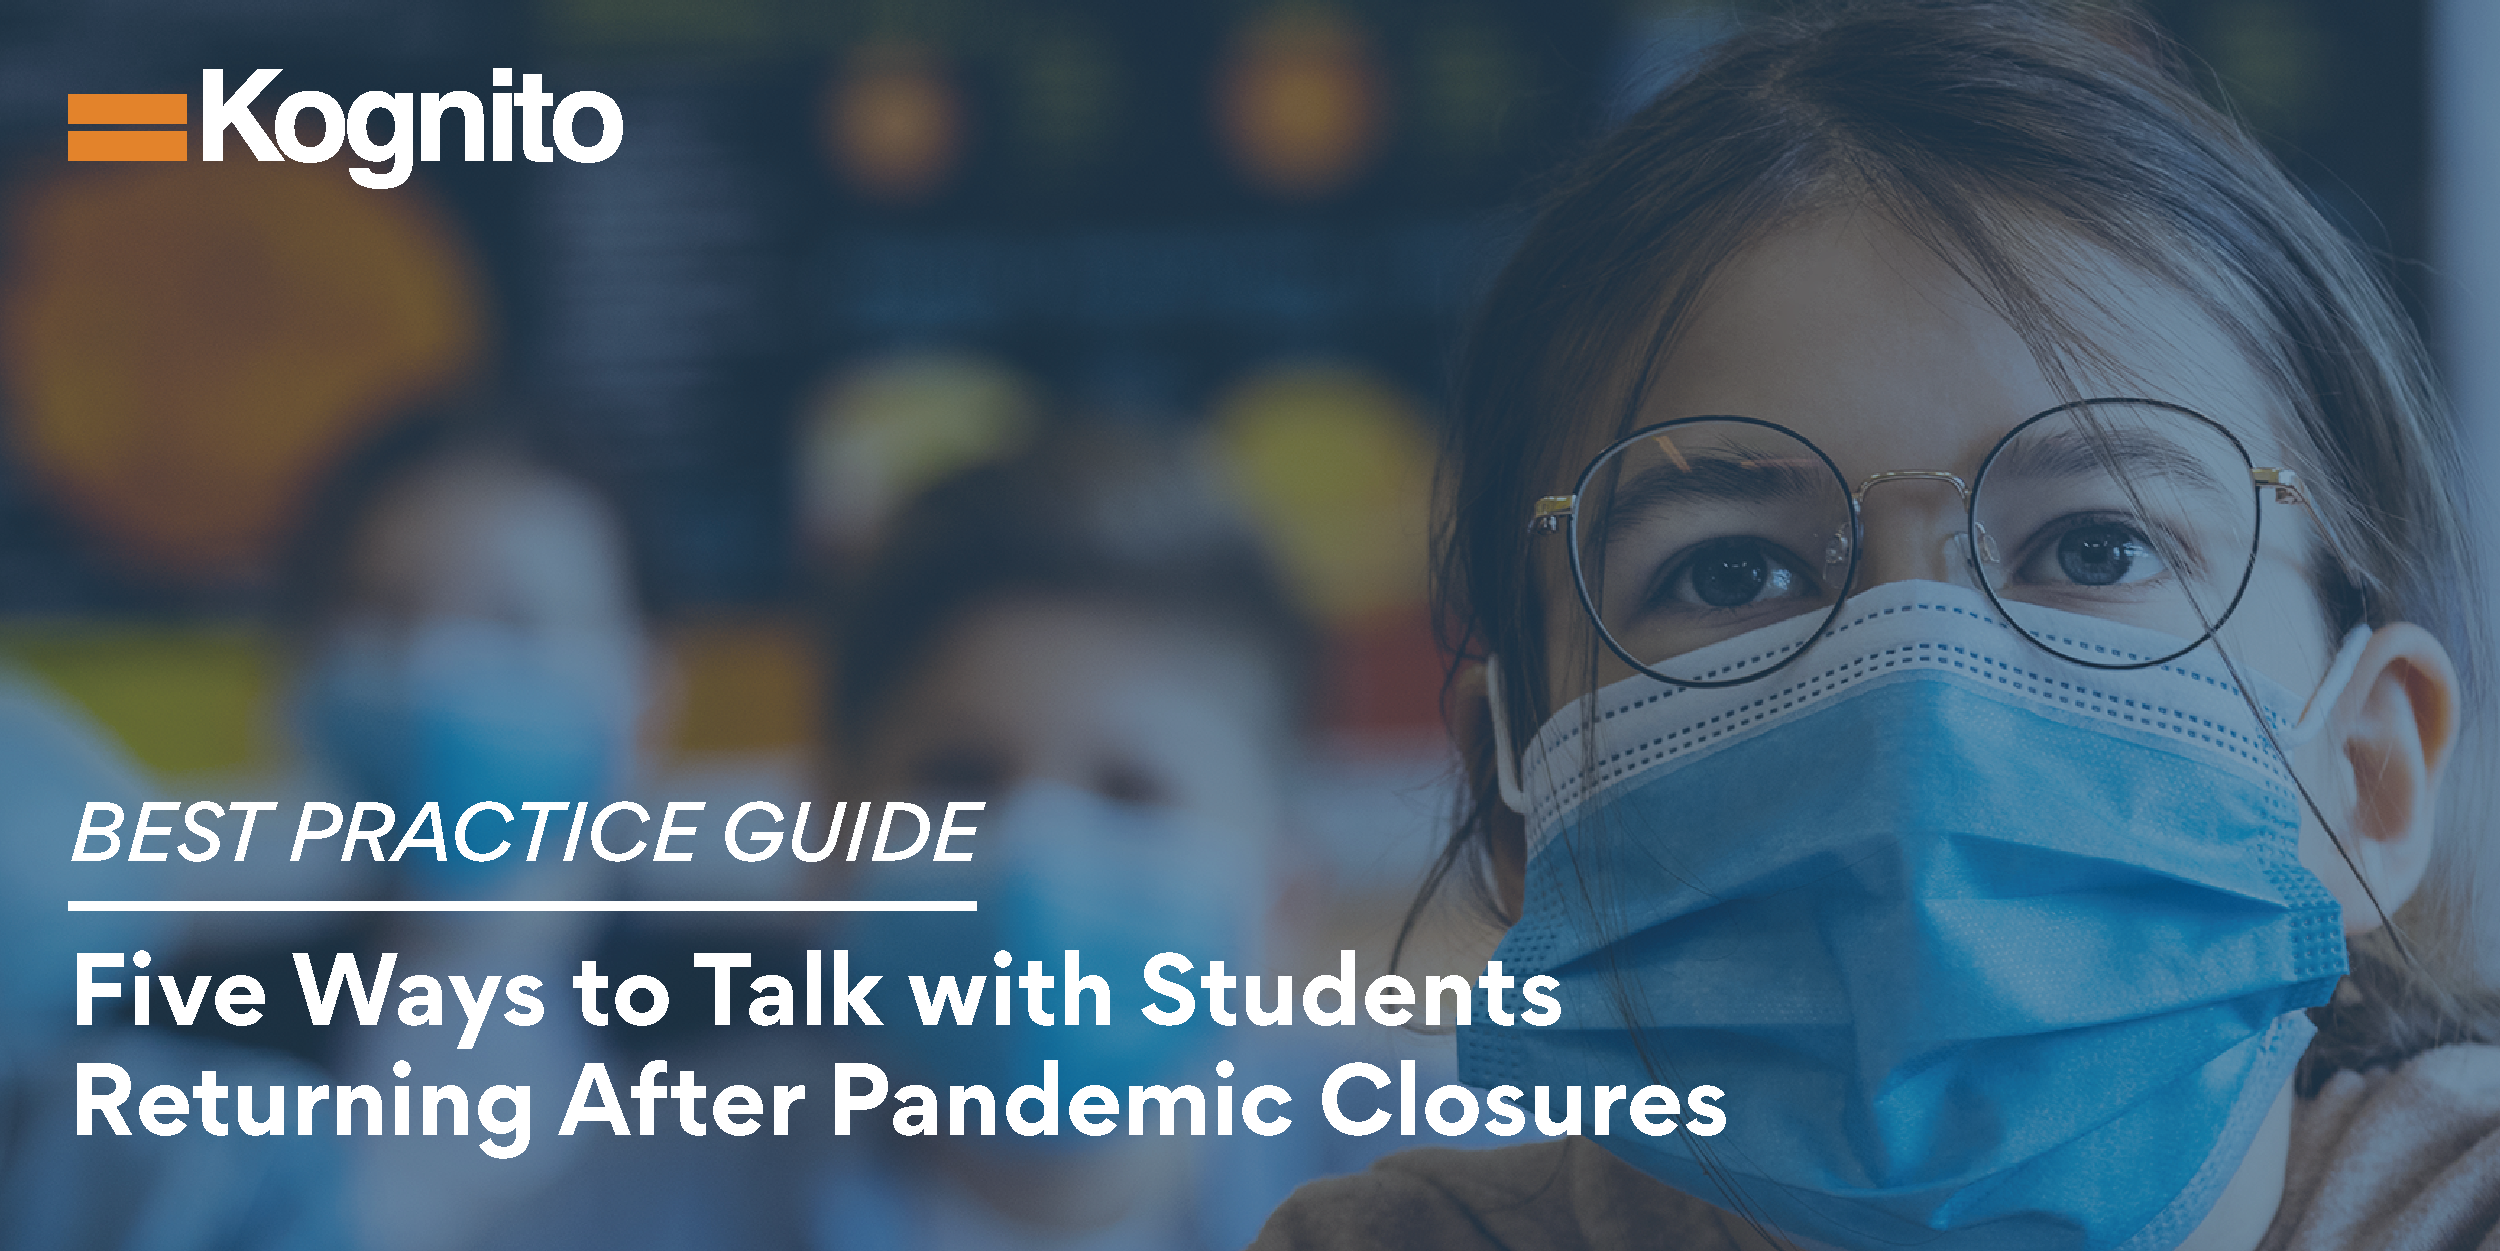 Best Practice Guide: Five Ways to Talk with Students Returning After Pandemic Closures